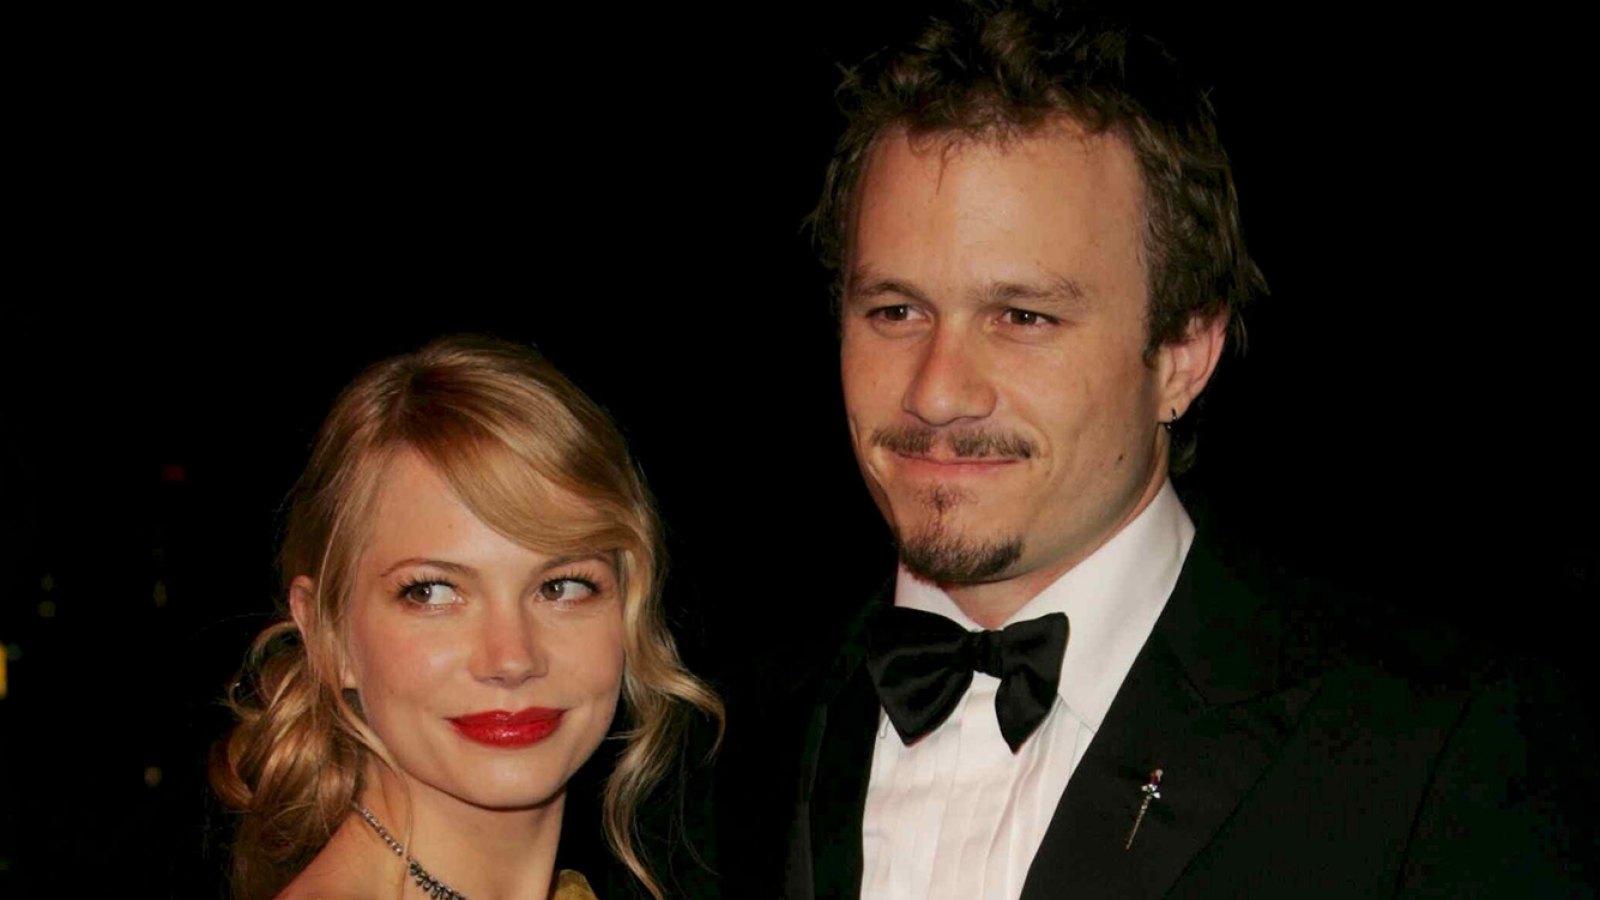 Michelle Williams' real-life tragedy with Heath Ledger inspired the movie Blood.